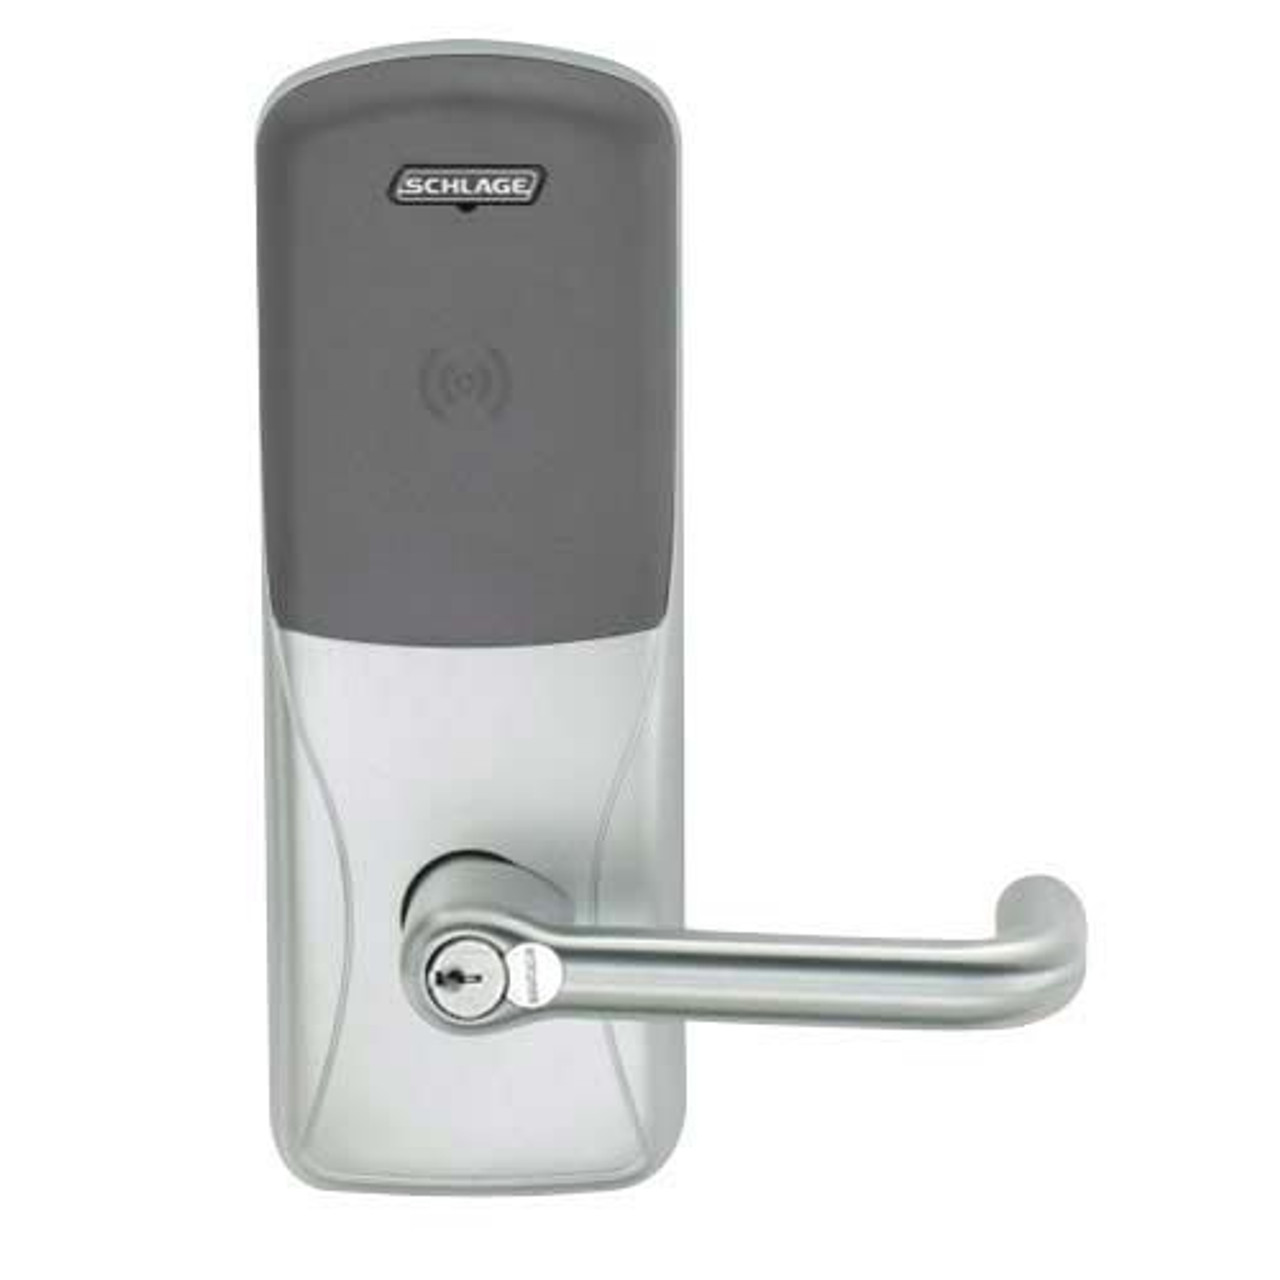 CO200-MD-40-PR-TLR-RD-619 Mortise Deadbolt Standalone Electronic Proximity Locks in Satin Nickel